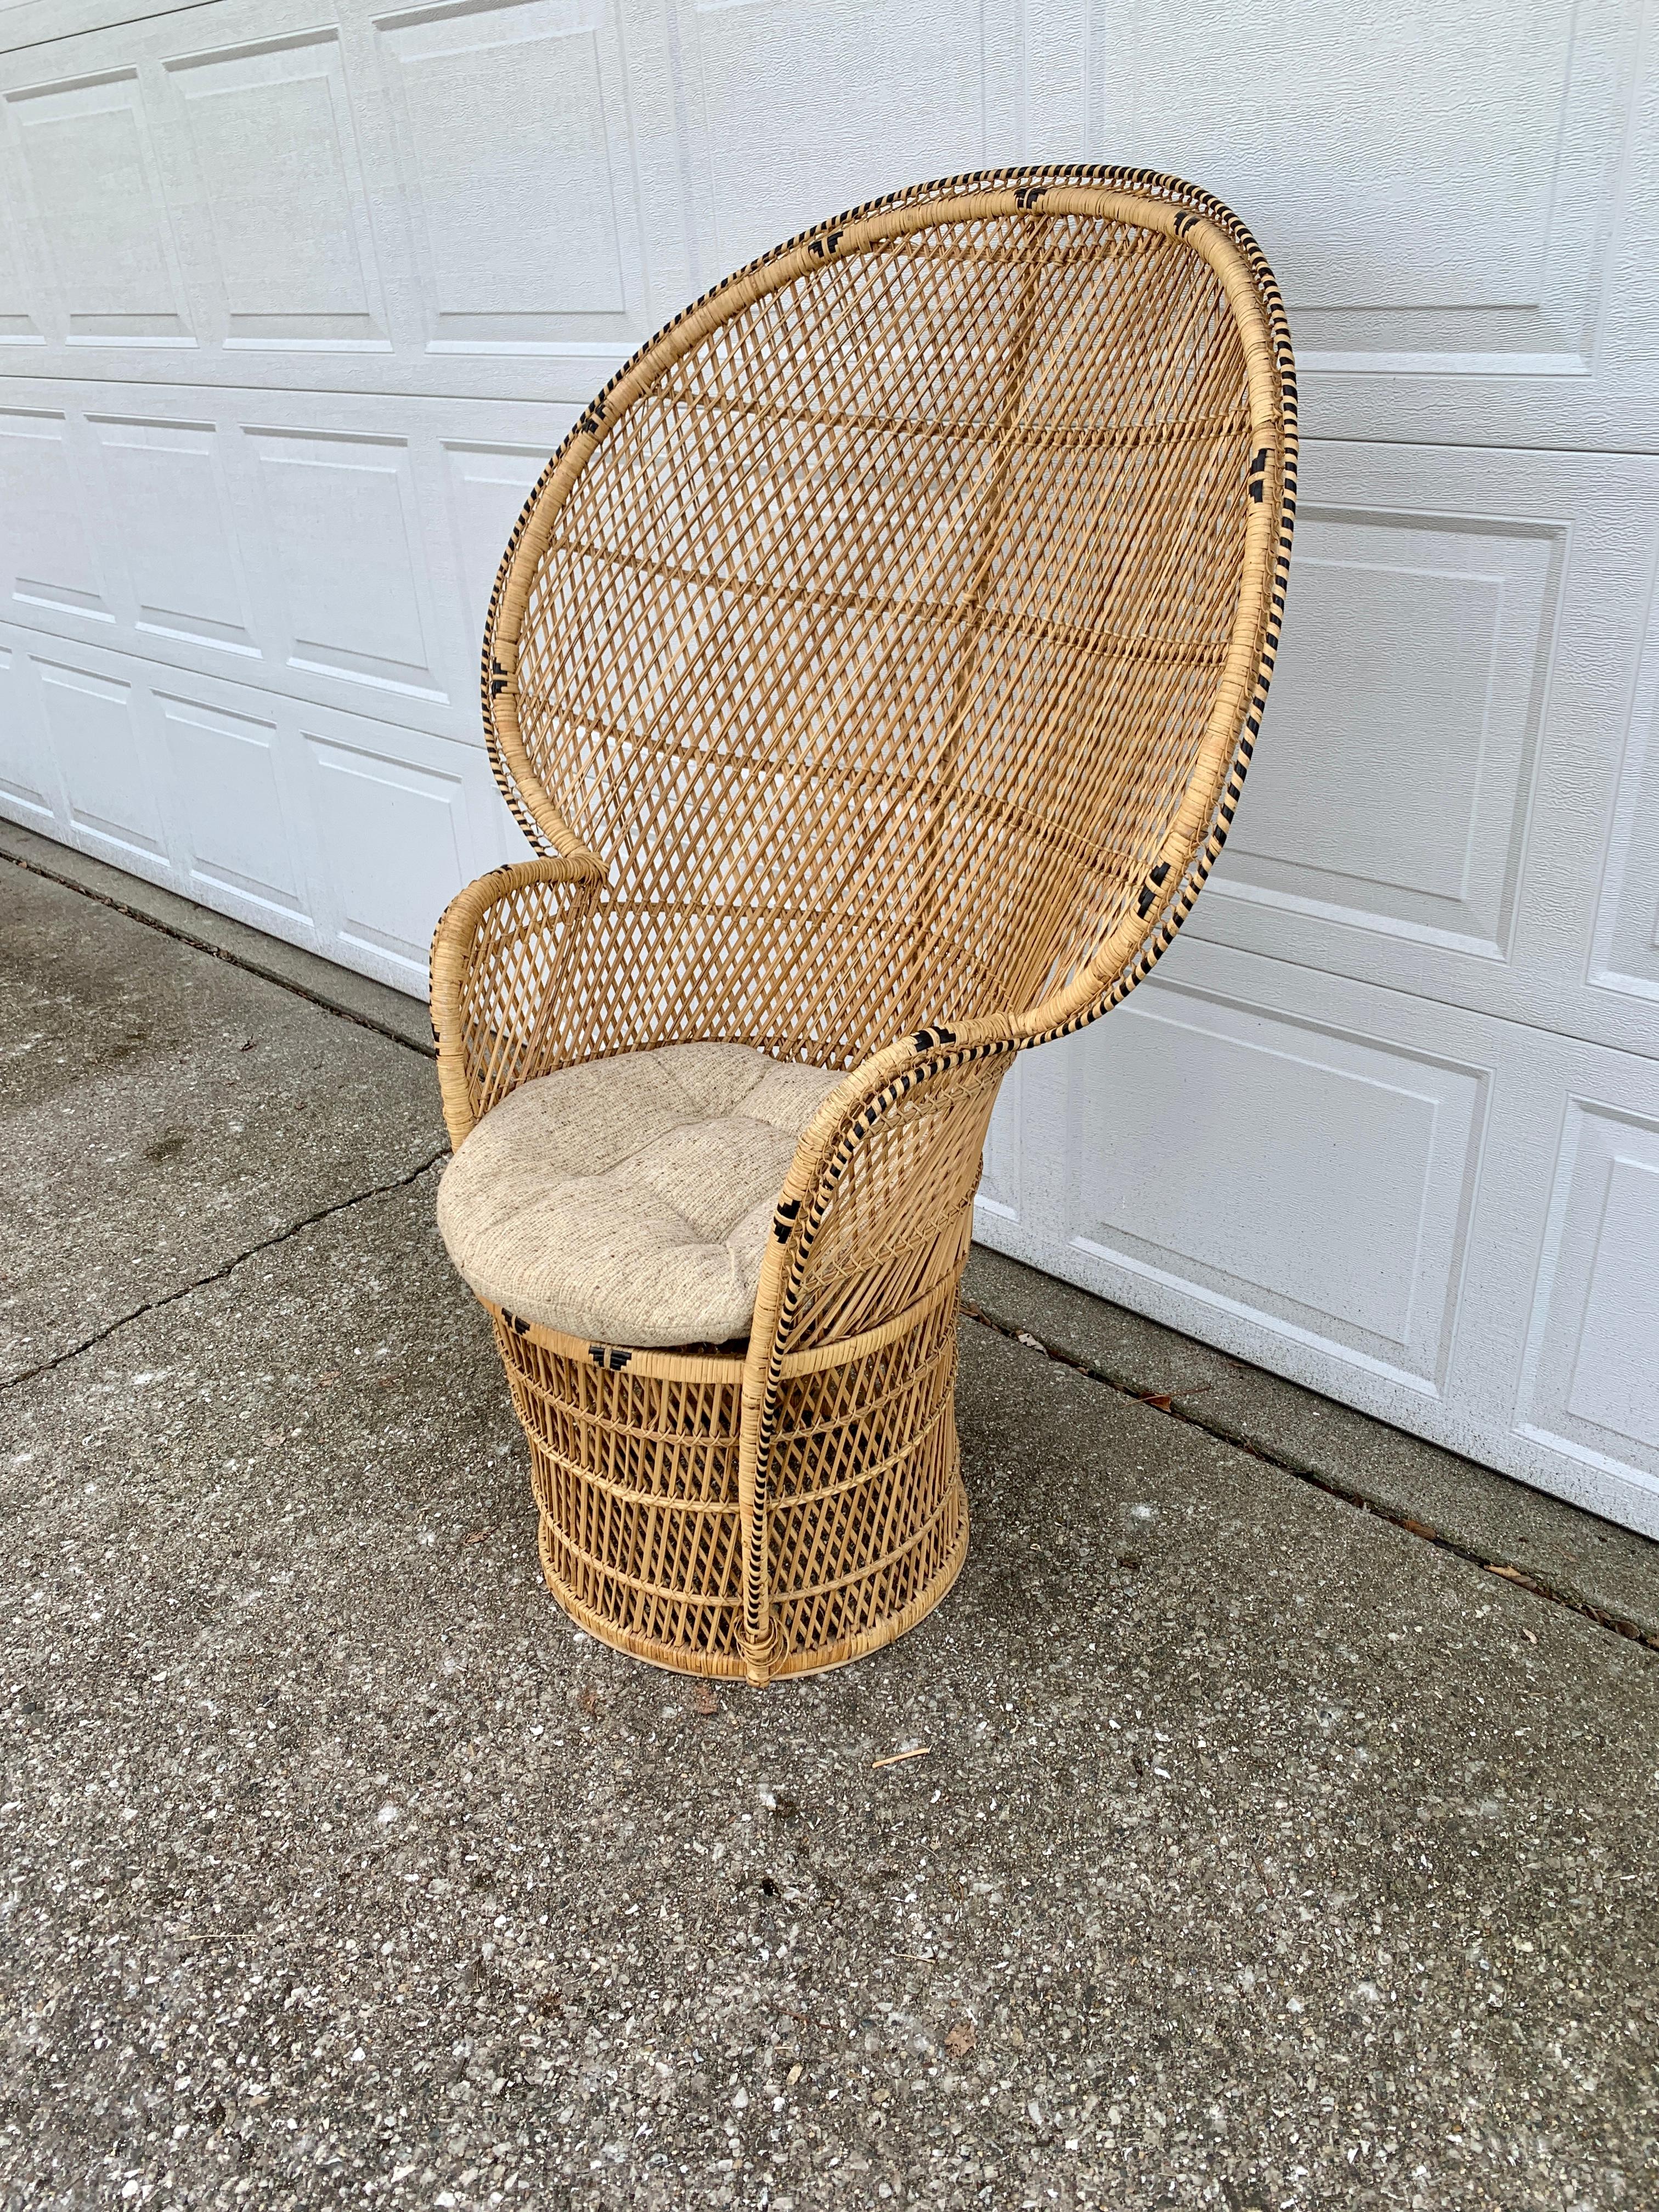 A gorgeous and iconic Mid-Century Modern Bohemian Emanuelle peacock chair??

circa 1970s??

Woven rattan and wicker, with a large-scale fan back.??

Measures: 36.25” W x 21” D x 53” H. Seat height 19